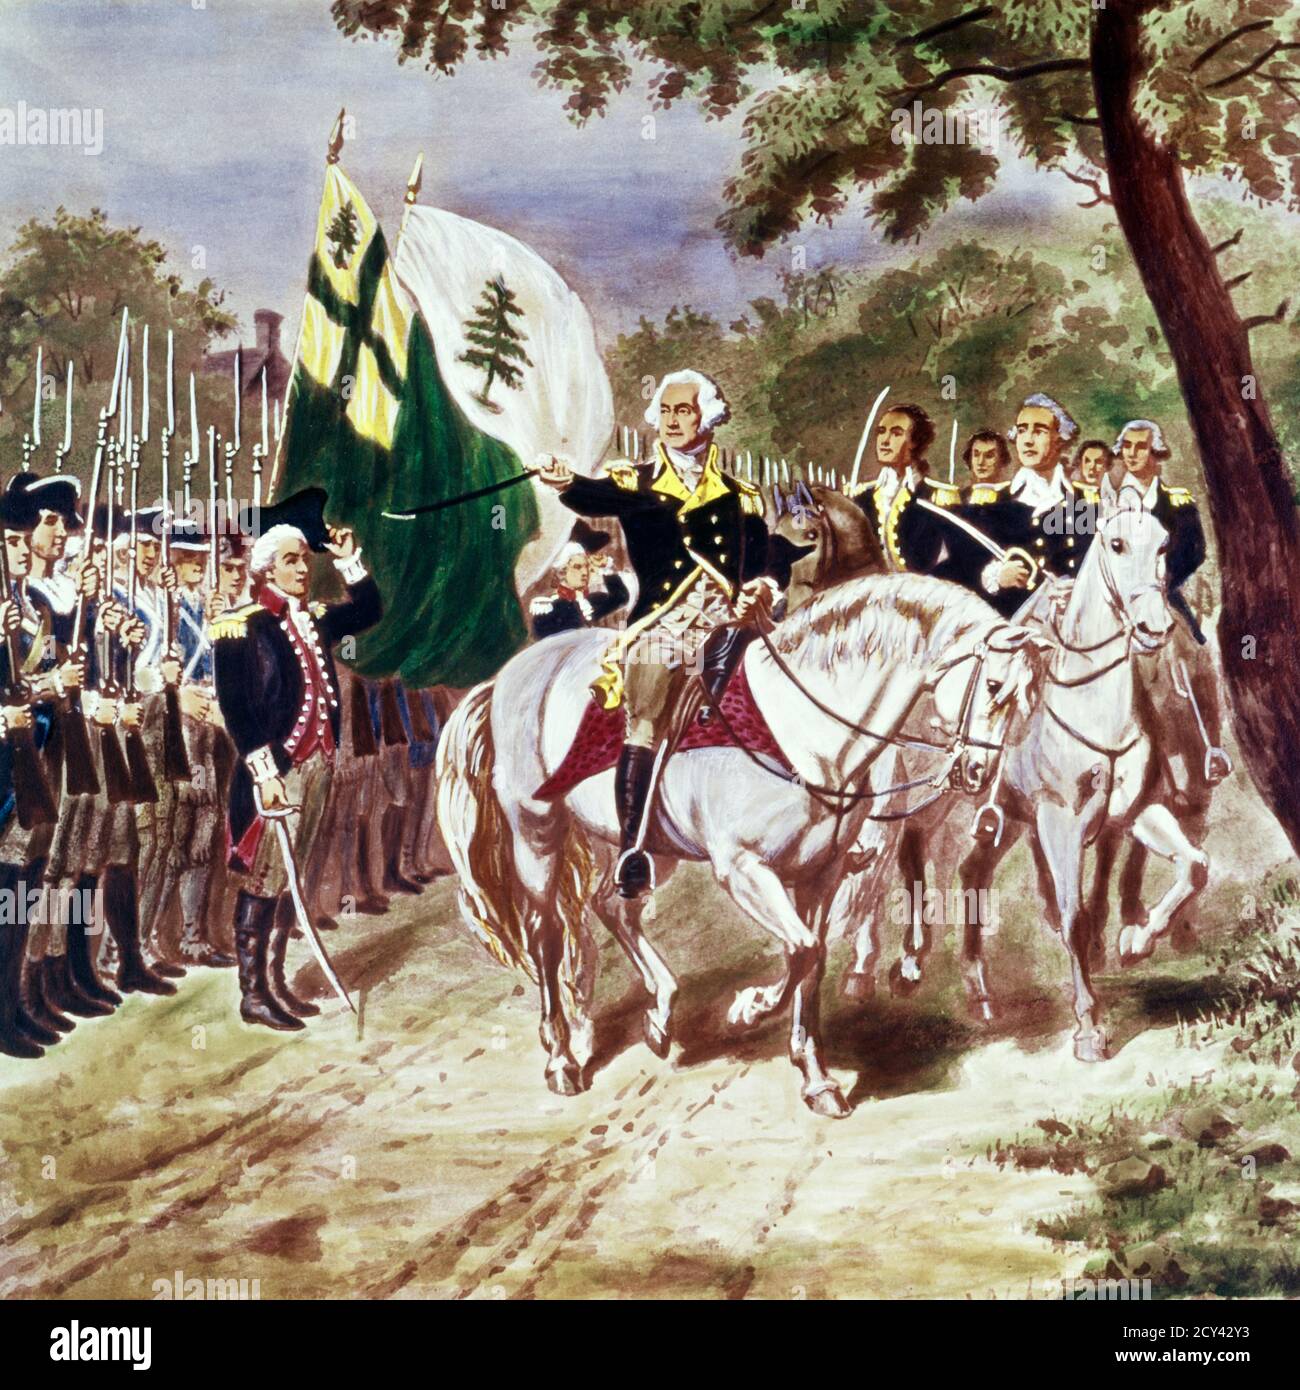 1770s JULY 3, 1775 GEORGE WASHINGTON ON HORSEBACK TAKING COMMAND OF THE COLONIAL CONTINENTAL ARMY IN CAMBRIDGE MASSACHUSETTS USA - ka753 SPL001 HARS STRENGTH STRATEGY EXCITEMENT LEADERSHIP POLITICIAN POWERFUL CONTINENTAL 1776 AUTHORITY OCCUPATIONS PATRIOT POLITICS TROOPS UNIFORMS WAR OF INDEPENDENCE CONNECTION CONCEPTUAL JULY 3 MUSKET REVOLUTIONARY WAR GEORGE WASHINGTON REVOLT AMERICAN REVOLUTIONARY WAR CAMBRIDGE 1770s AMERICAN REVOLUTION COLONIES COMMAND COOPERATION MAMMAL STATESMAN TOGETHERNESS 1775 FOUNDING FATHER MILITIA OLD FASHIONED VIRGINIAN Stock Photo